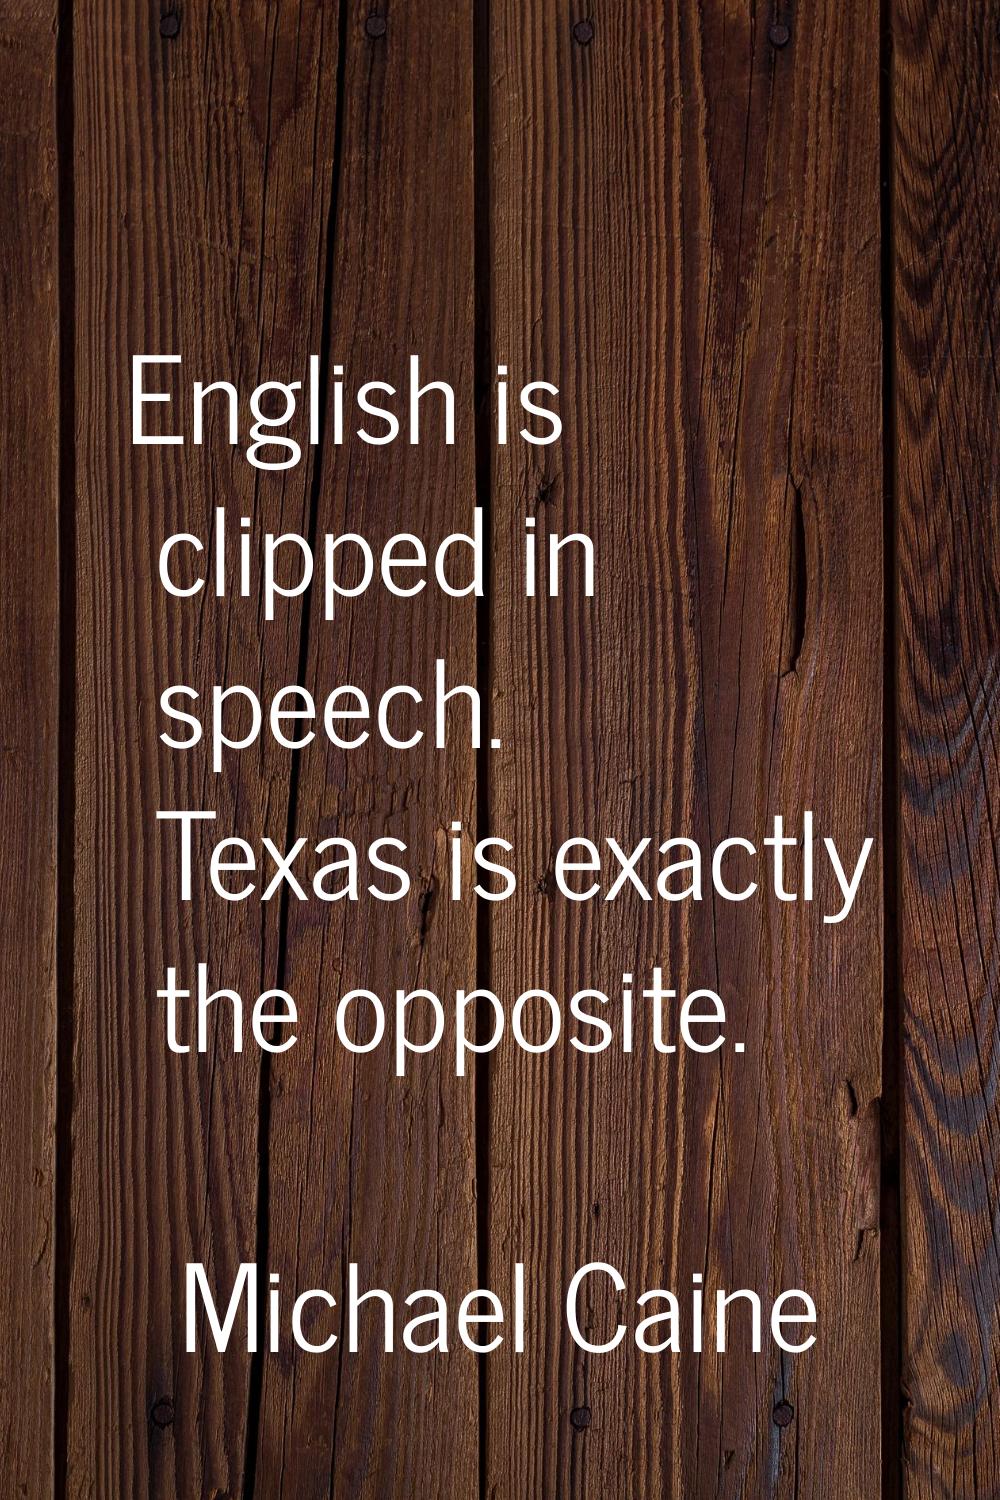 English is clipped in speech. Texas is exactly the opposite.